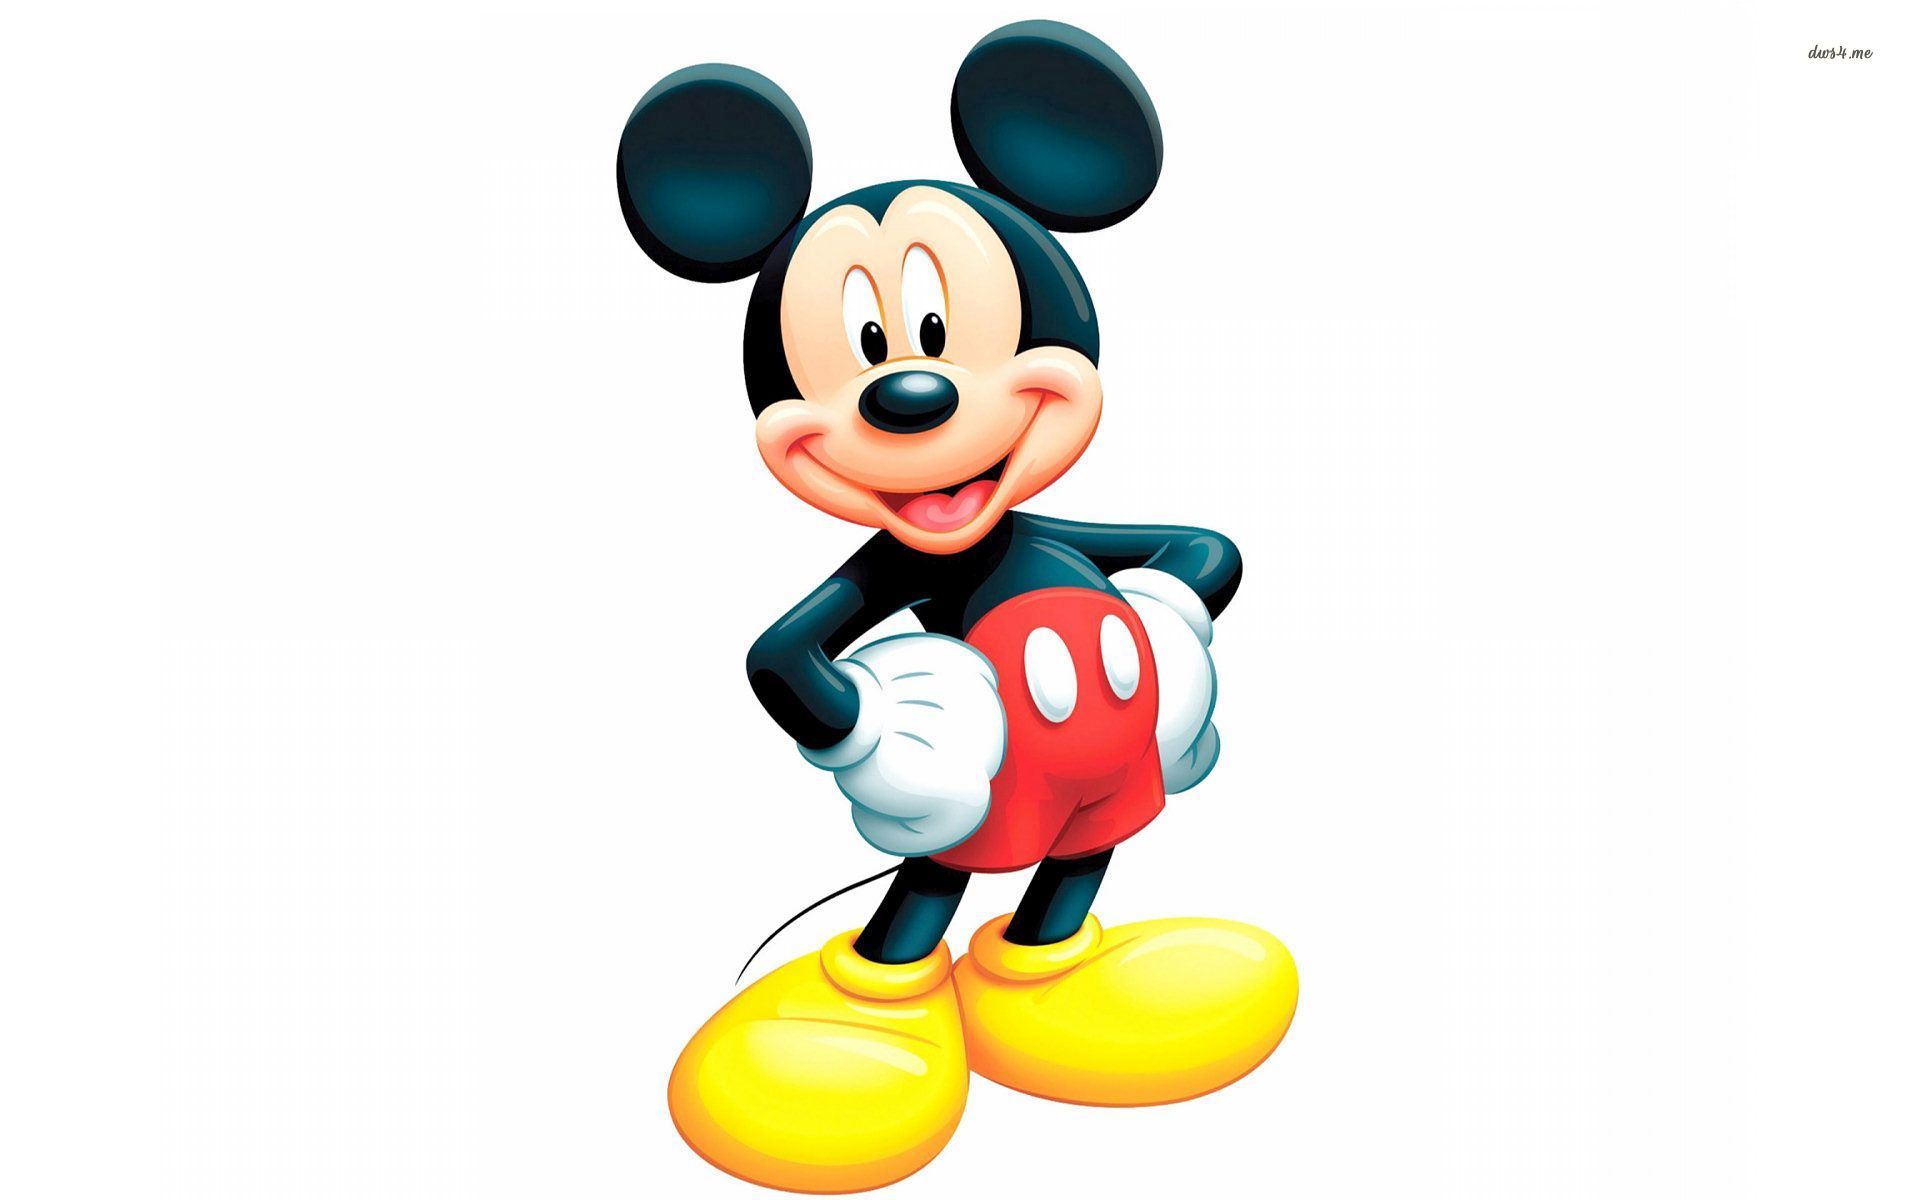 Mickey Mouse Wallpaper Hd - High Resolution Wallpaper Mickey Mouse Hd - HD Wallpaper 